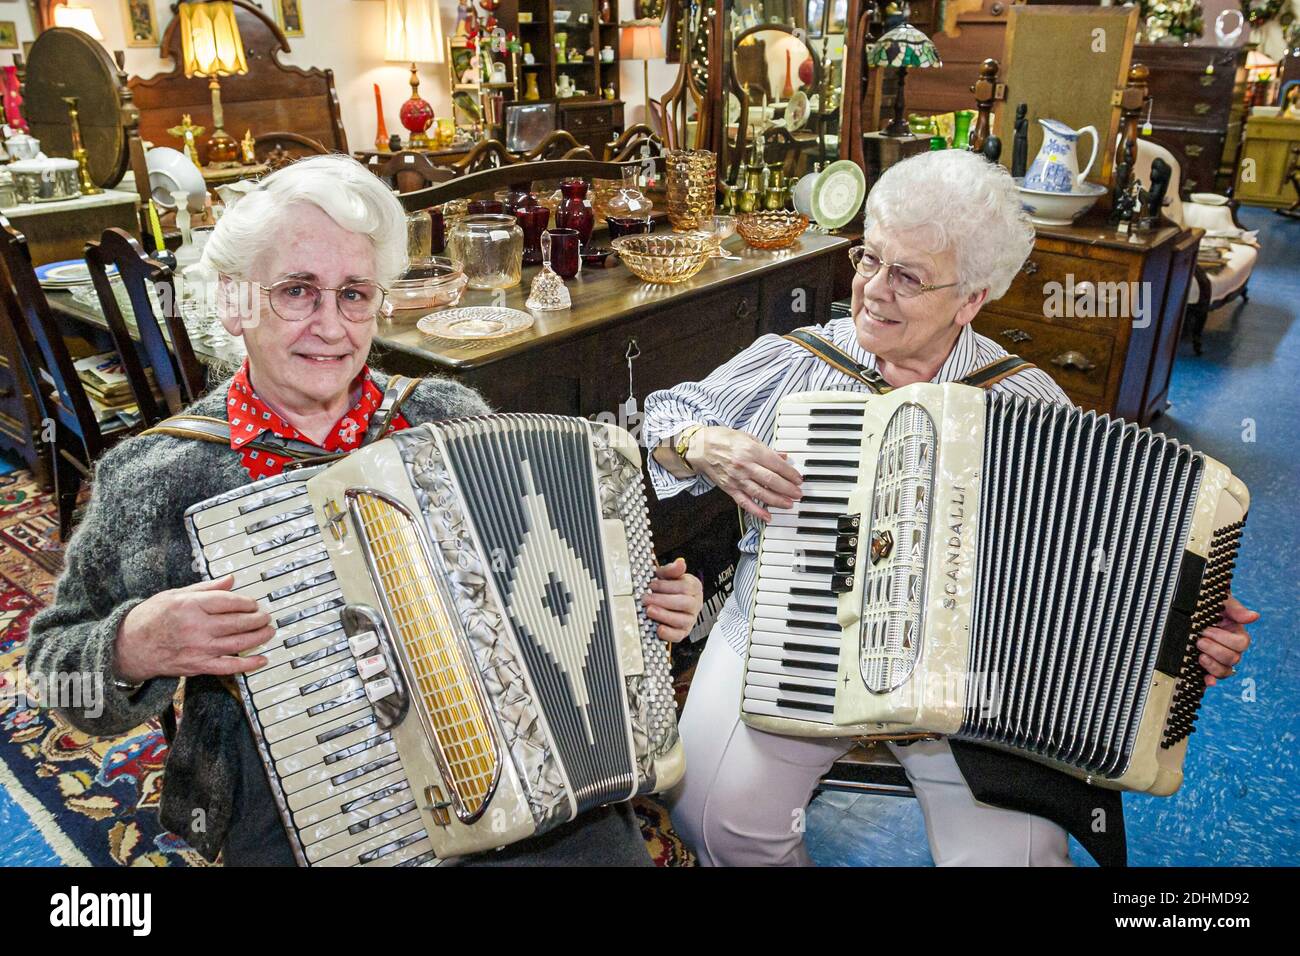 Alabama Hartselle Main Street Old Town Hall Antiques,senior seniors women woman female friends play playing accordion accordions,antique shop store in Stock Photo